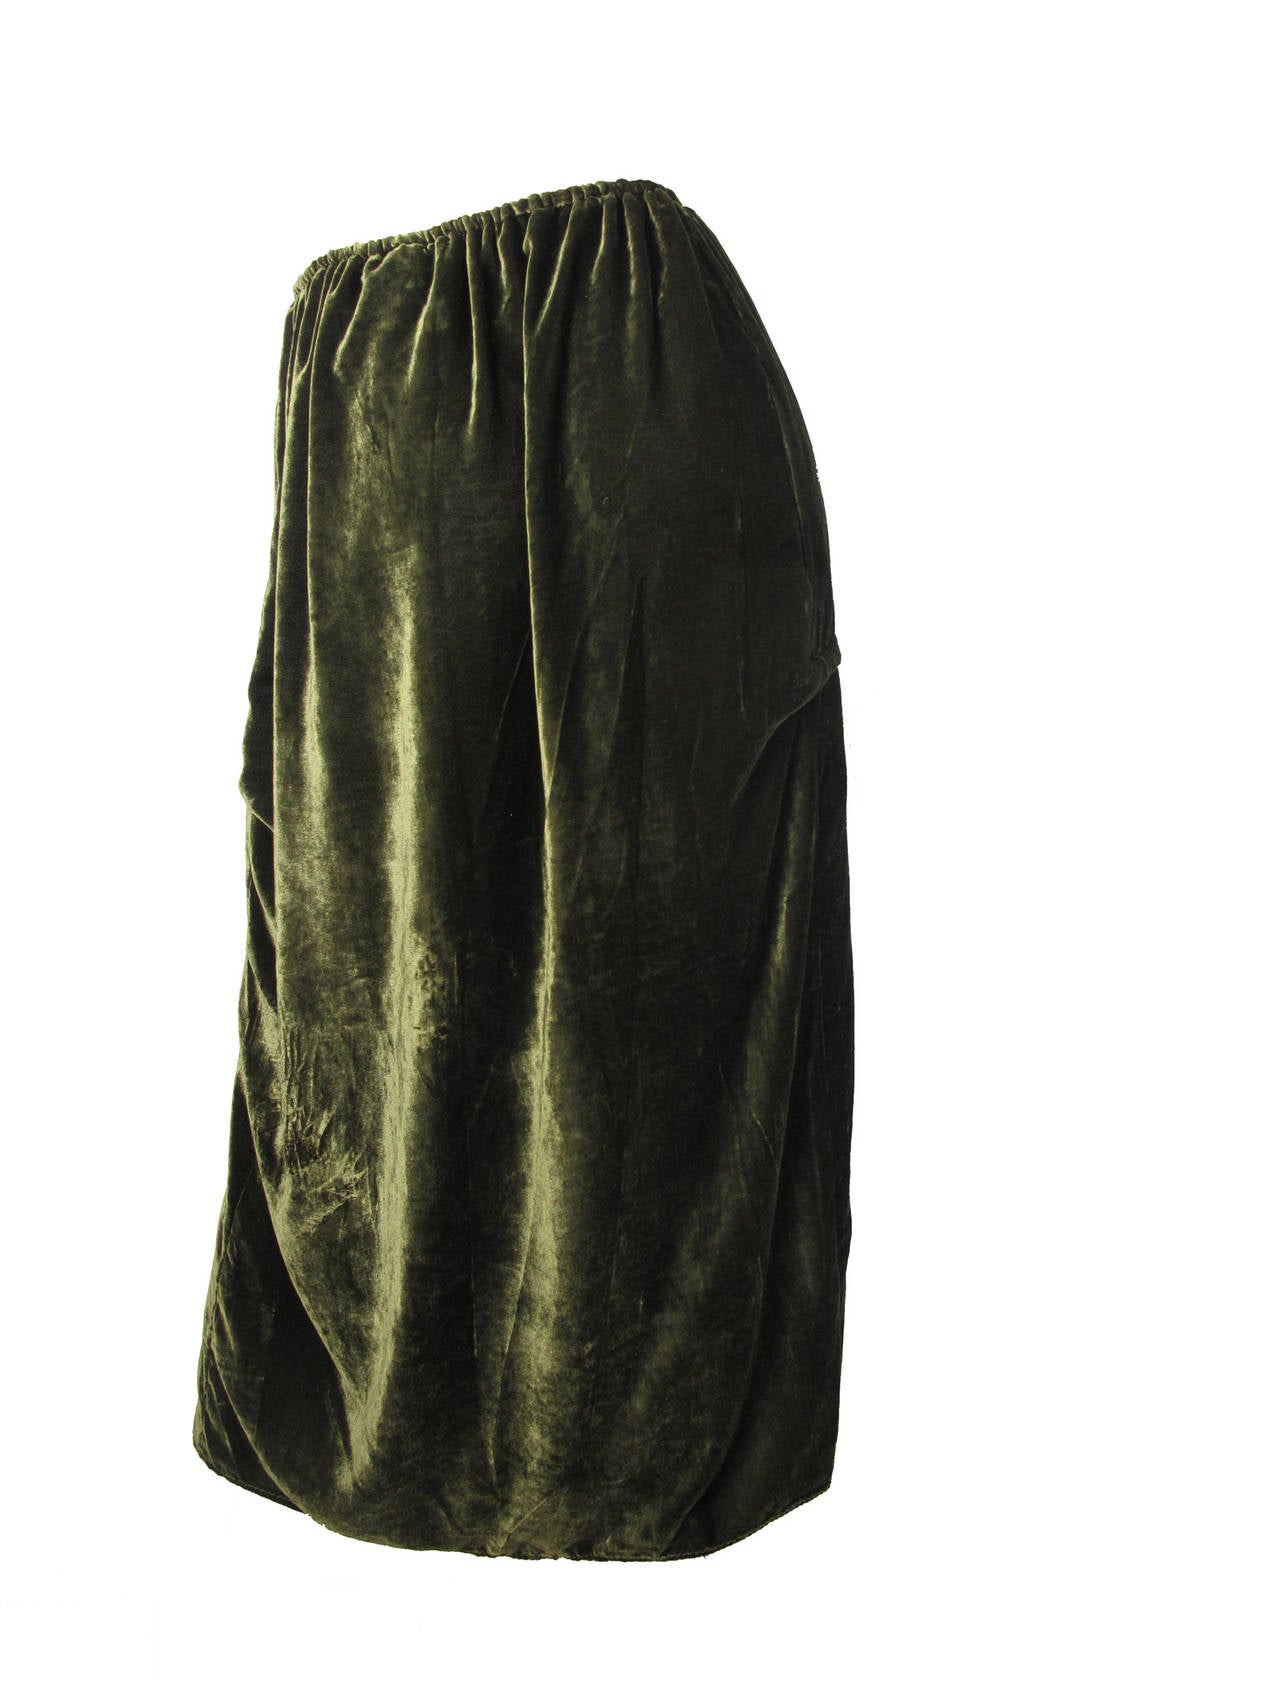 Yohji Yamamoto green light weight velvet with drawstring waist and one side pocket.  Polyester rayon fabric. Condition: Excellent Size 1

Measurements taken not tied

40